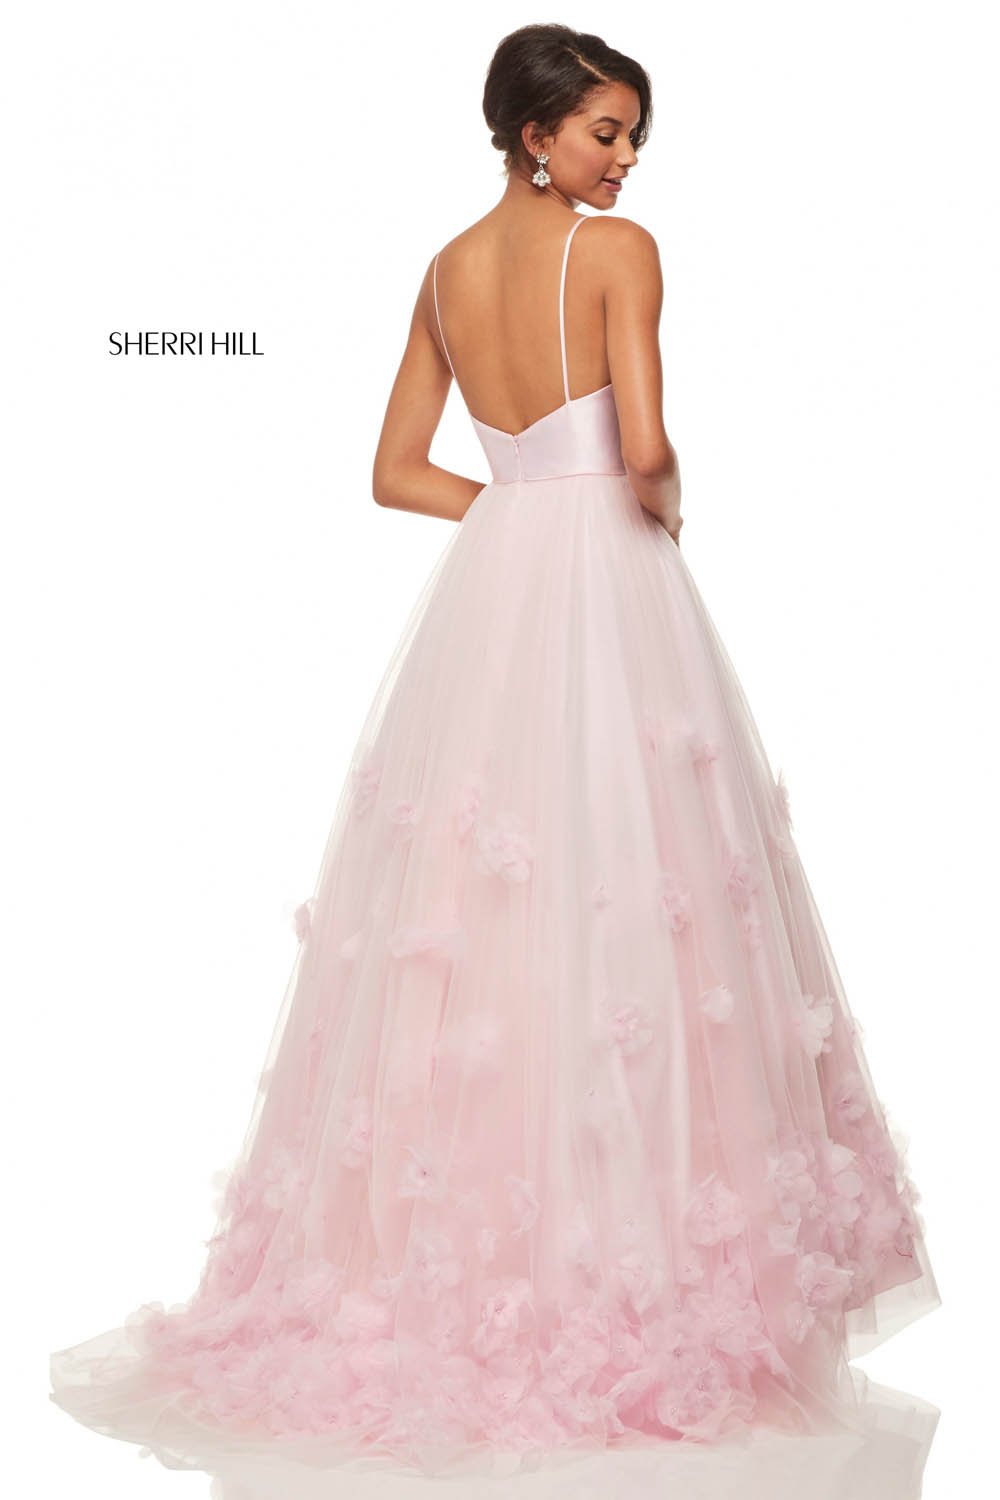 Sherri Hill 52828 dress images in these colors: Pink, Ivory.